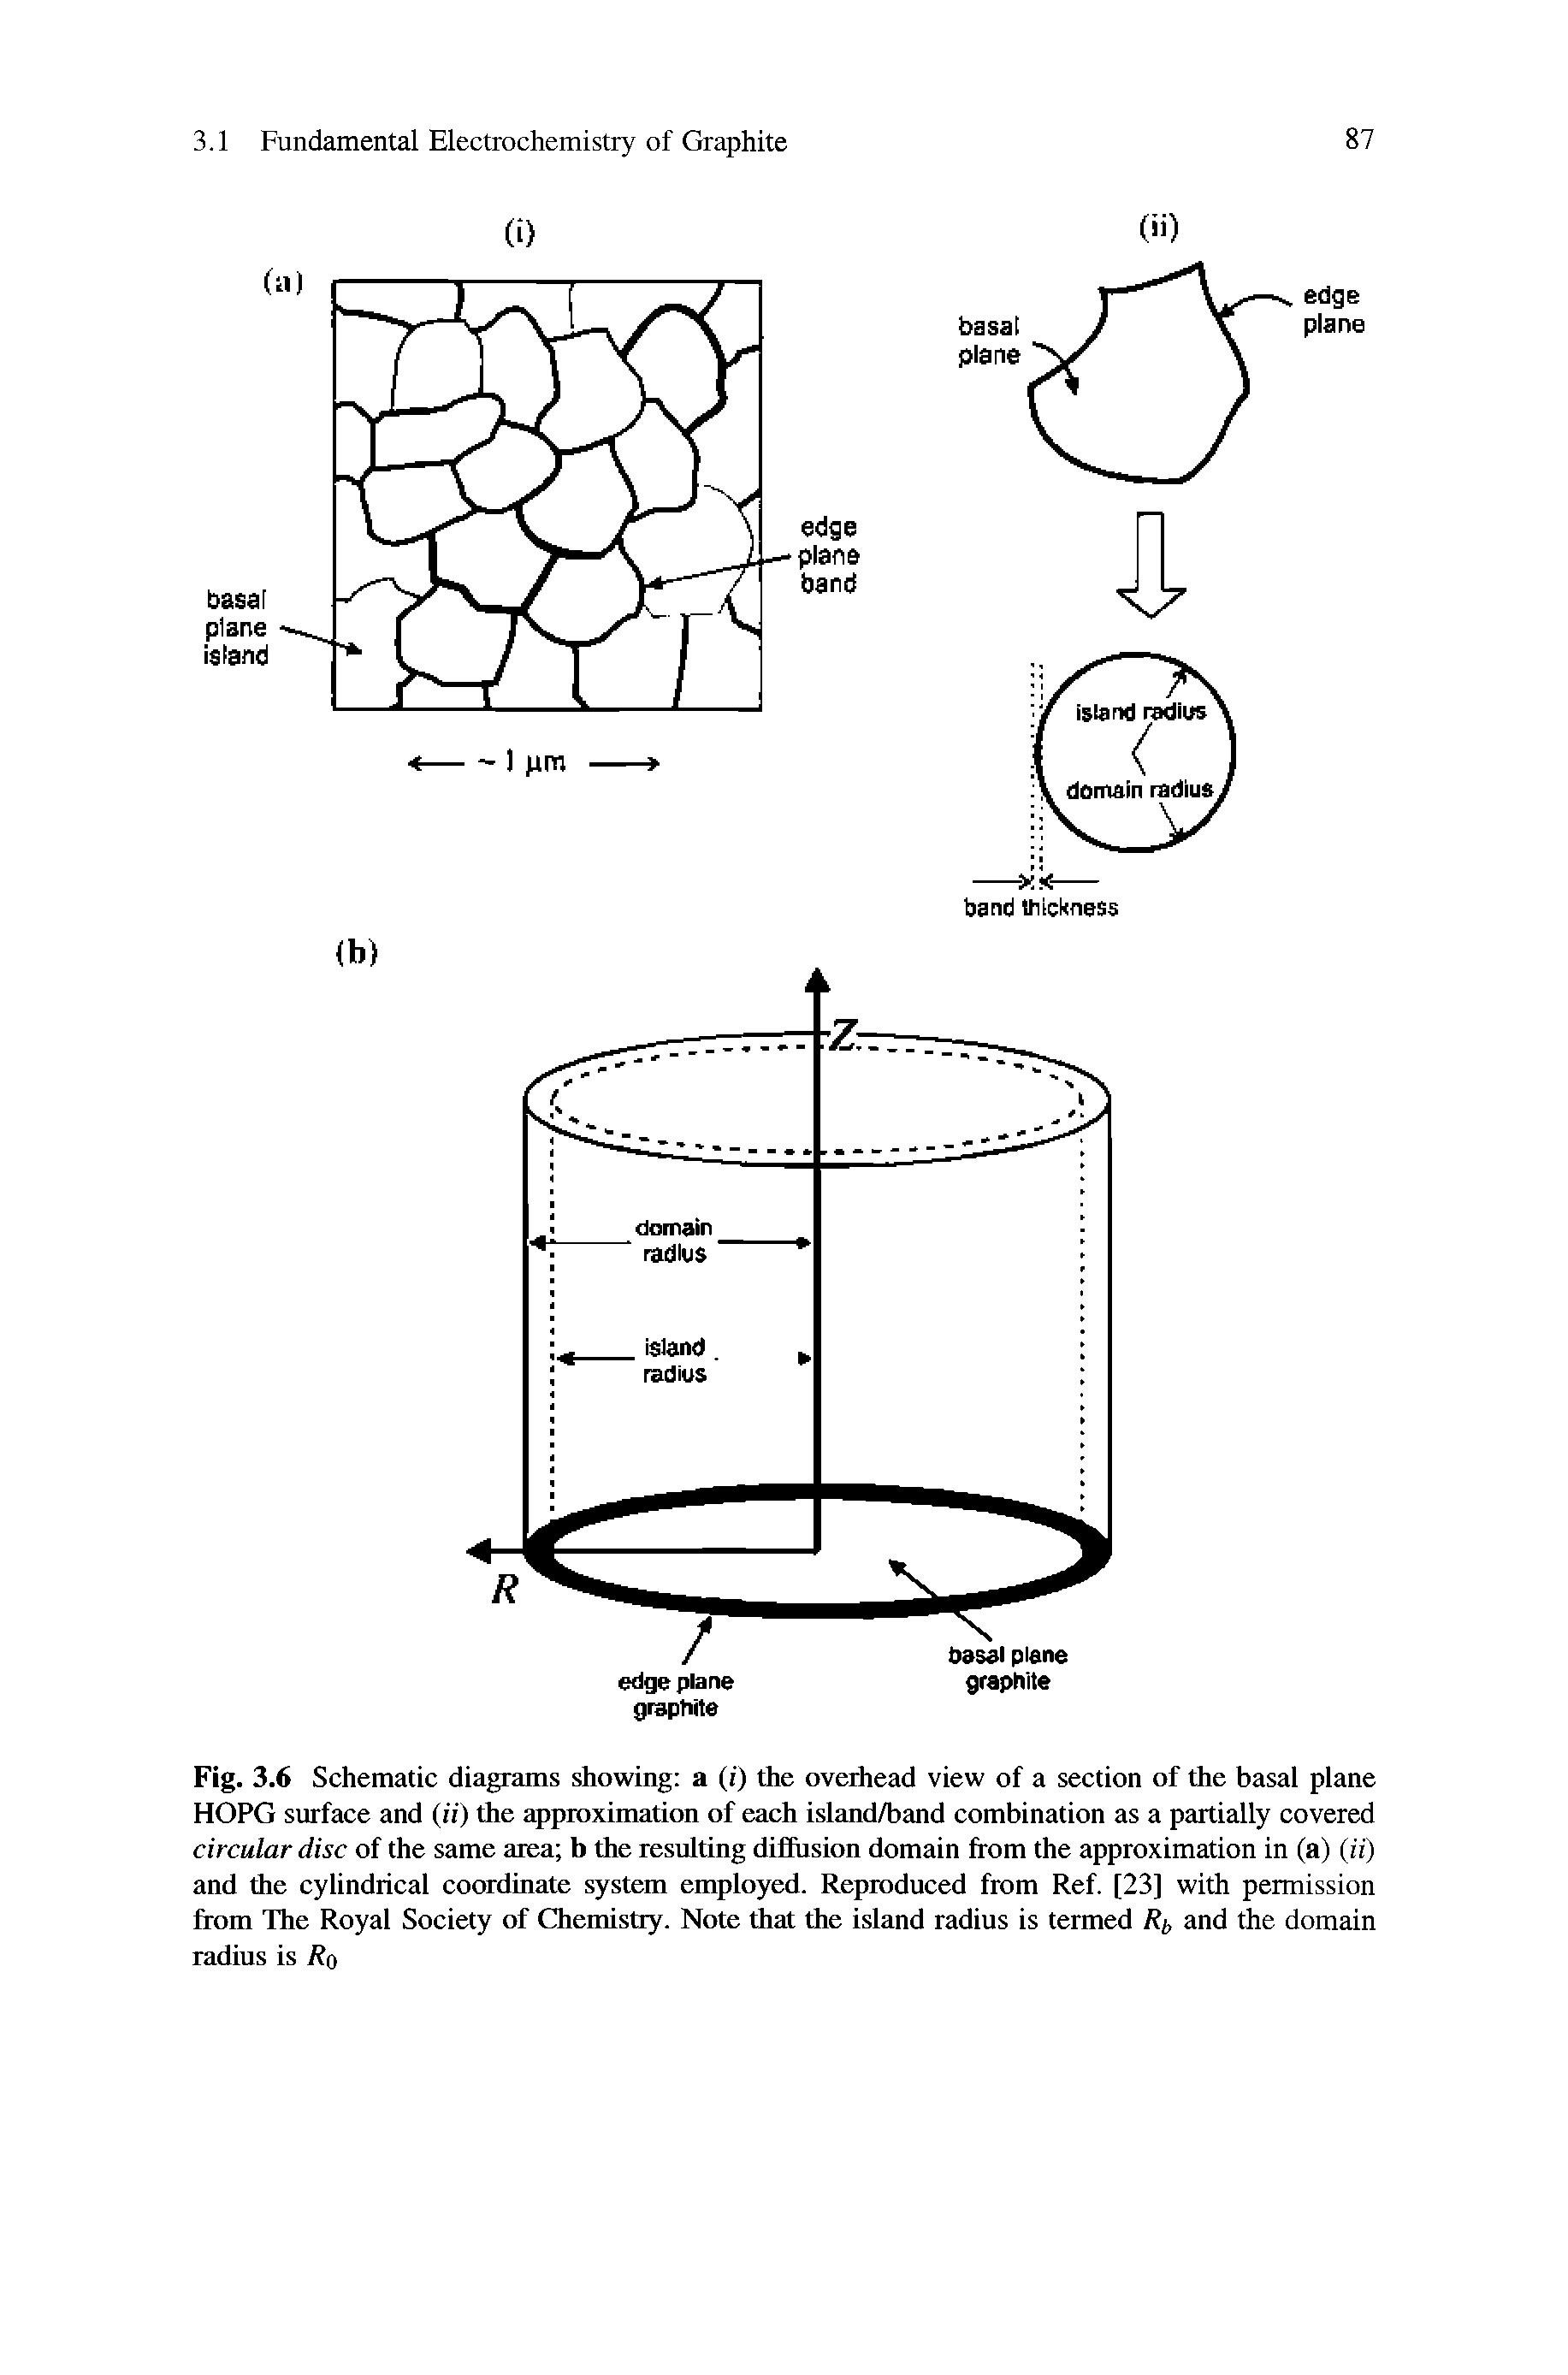 Fig. 3.6 Schematic diagrams showing a (i) the overhead view of a section of the basal plane HOPG surface and (if) the r proximation of each island/band combination as a partially covered circular disc of the same area b the resulting drfiusion domain from the approximation in (a) (ii) and the cylindrical coordinate system employed. Reproduced from Ref. [23] with permission from The Royal Society of Chemistry. Note that the island radius is termed Ri, and the domain radius is Ro...